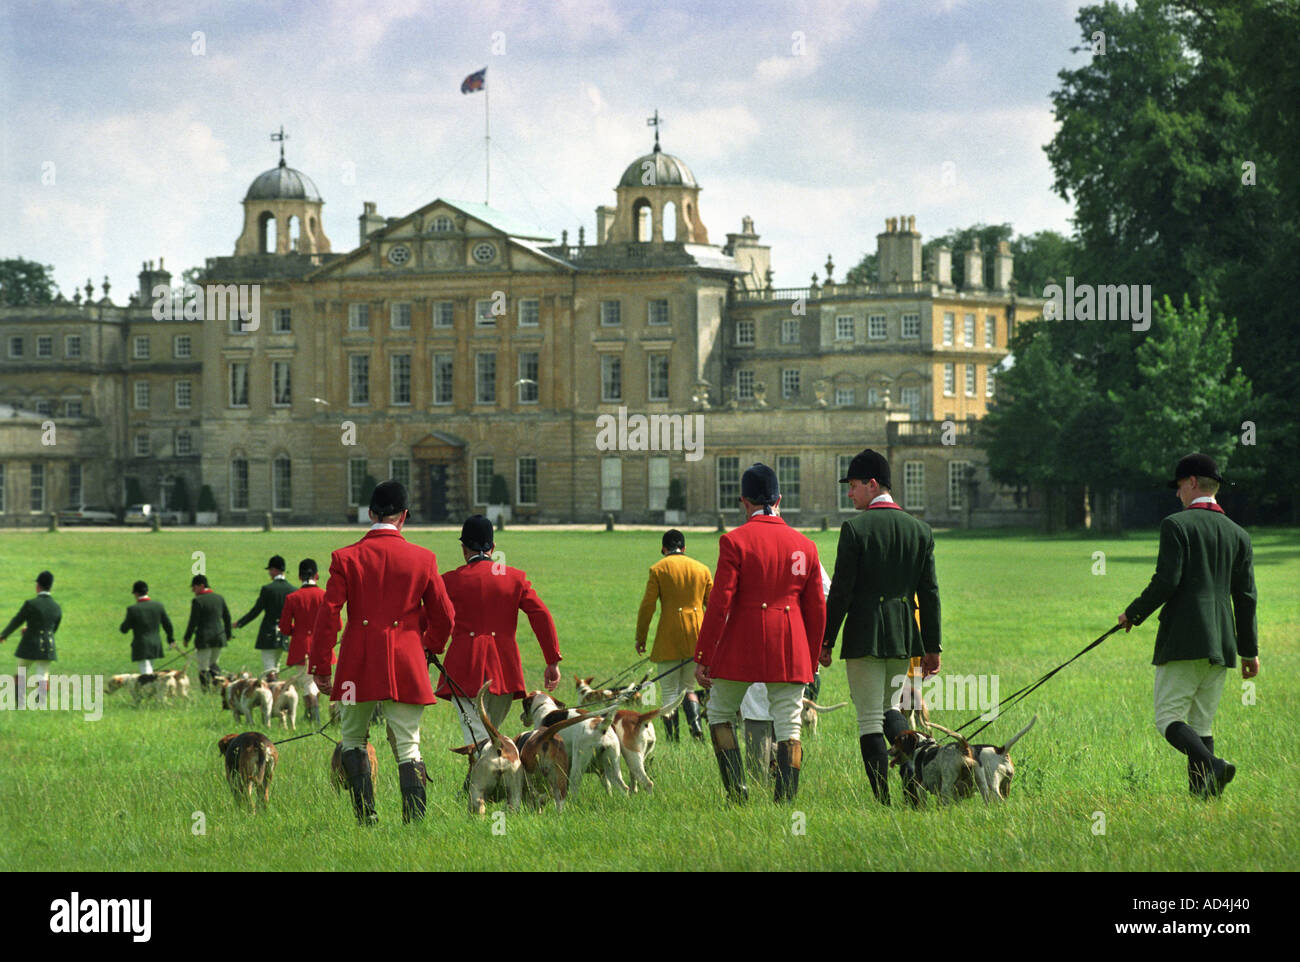 FOX HOUNDS ON LEADS AT THE BEAUFORT HUNT'S GLOUCESTERSHIRE FESTIVAL OF HUNTING UK AT BADMINTON HOUSE SOUTH GLOUCESTERSHIRE UK Stock Photo